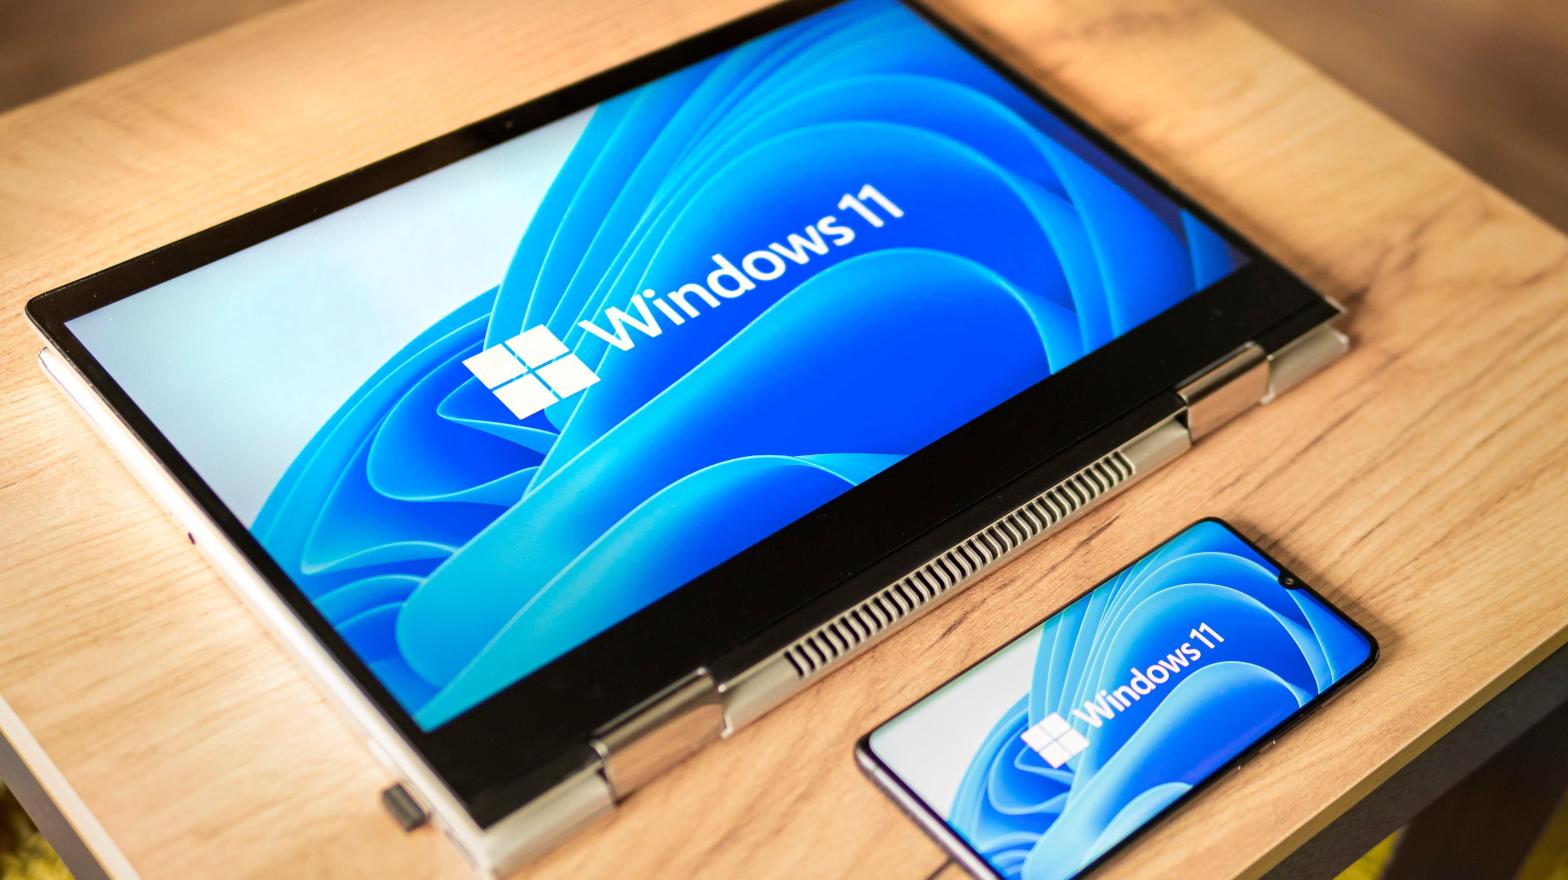 Presentations from last year claim Microsoft was considering how Windows 11 could stream onto multiple devices, much in the way 365 currently does. (Photo: Melnikov Dmitriy, Shutterstock)